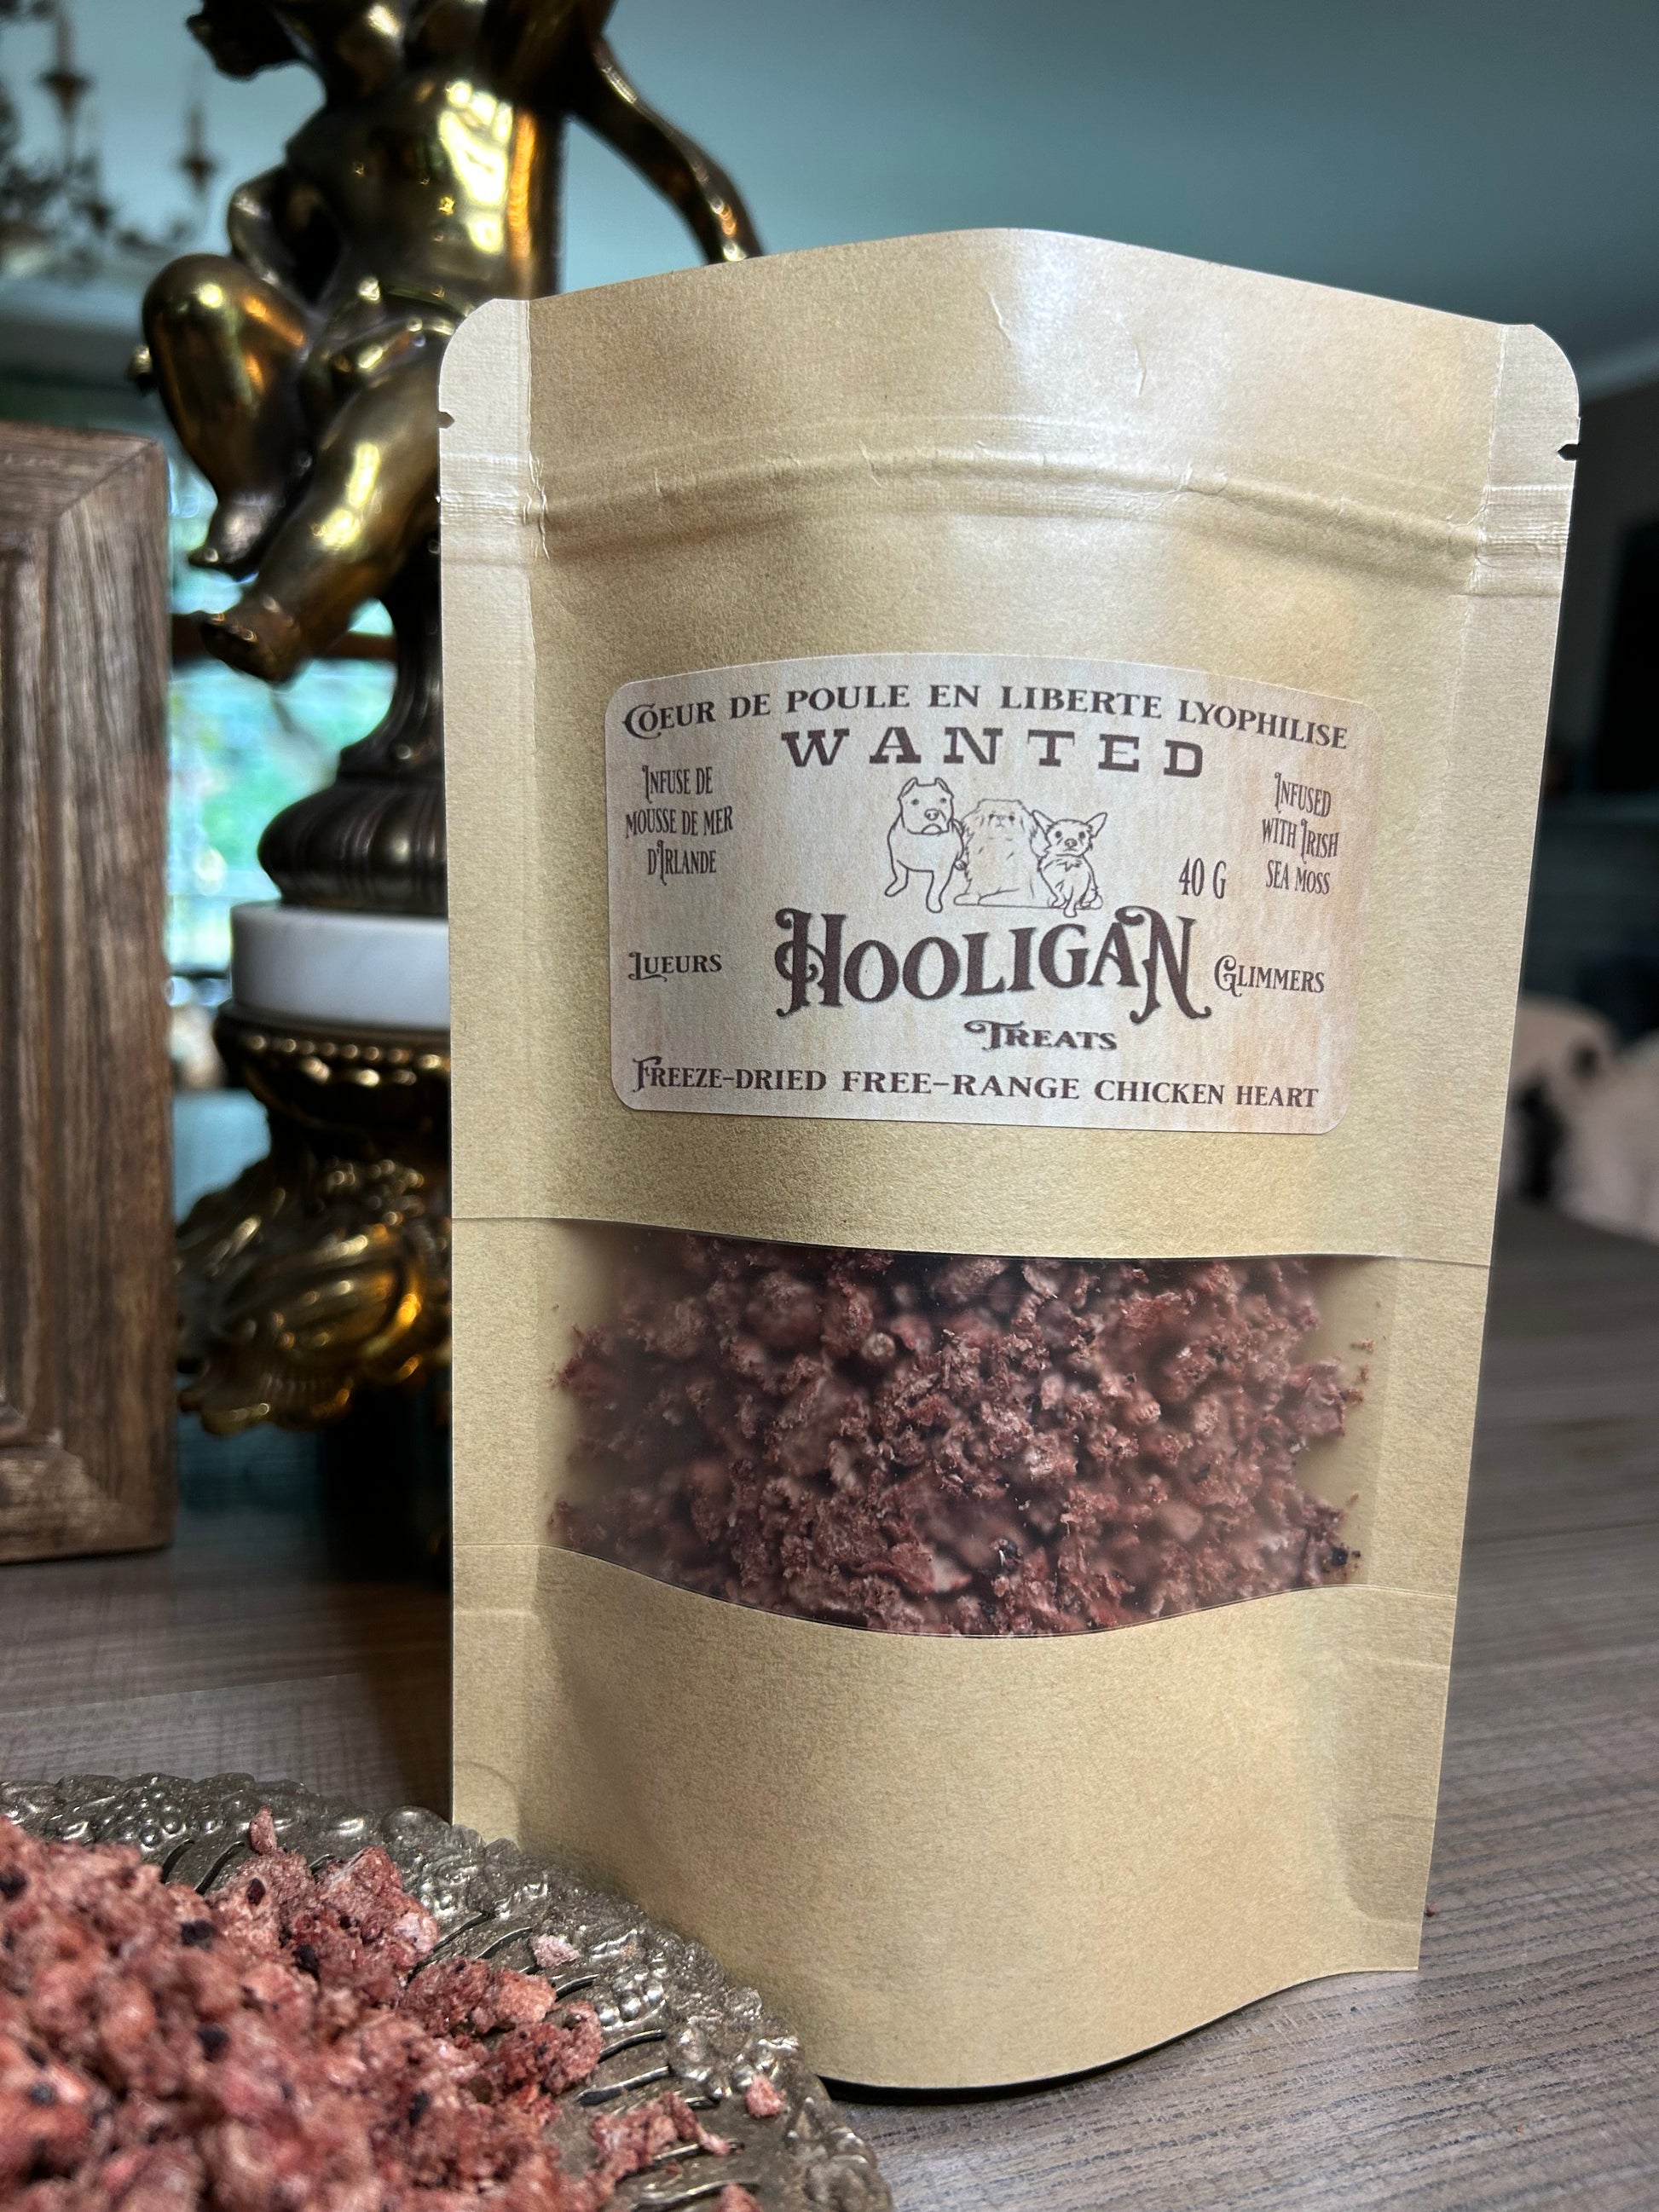 Hooligan treats, chicken heart, Infused with Wildcrafted Irish Sea Moss, Pixie Glimmers, 40 g bag